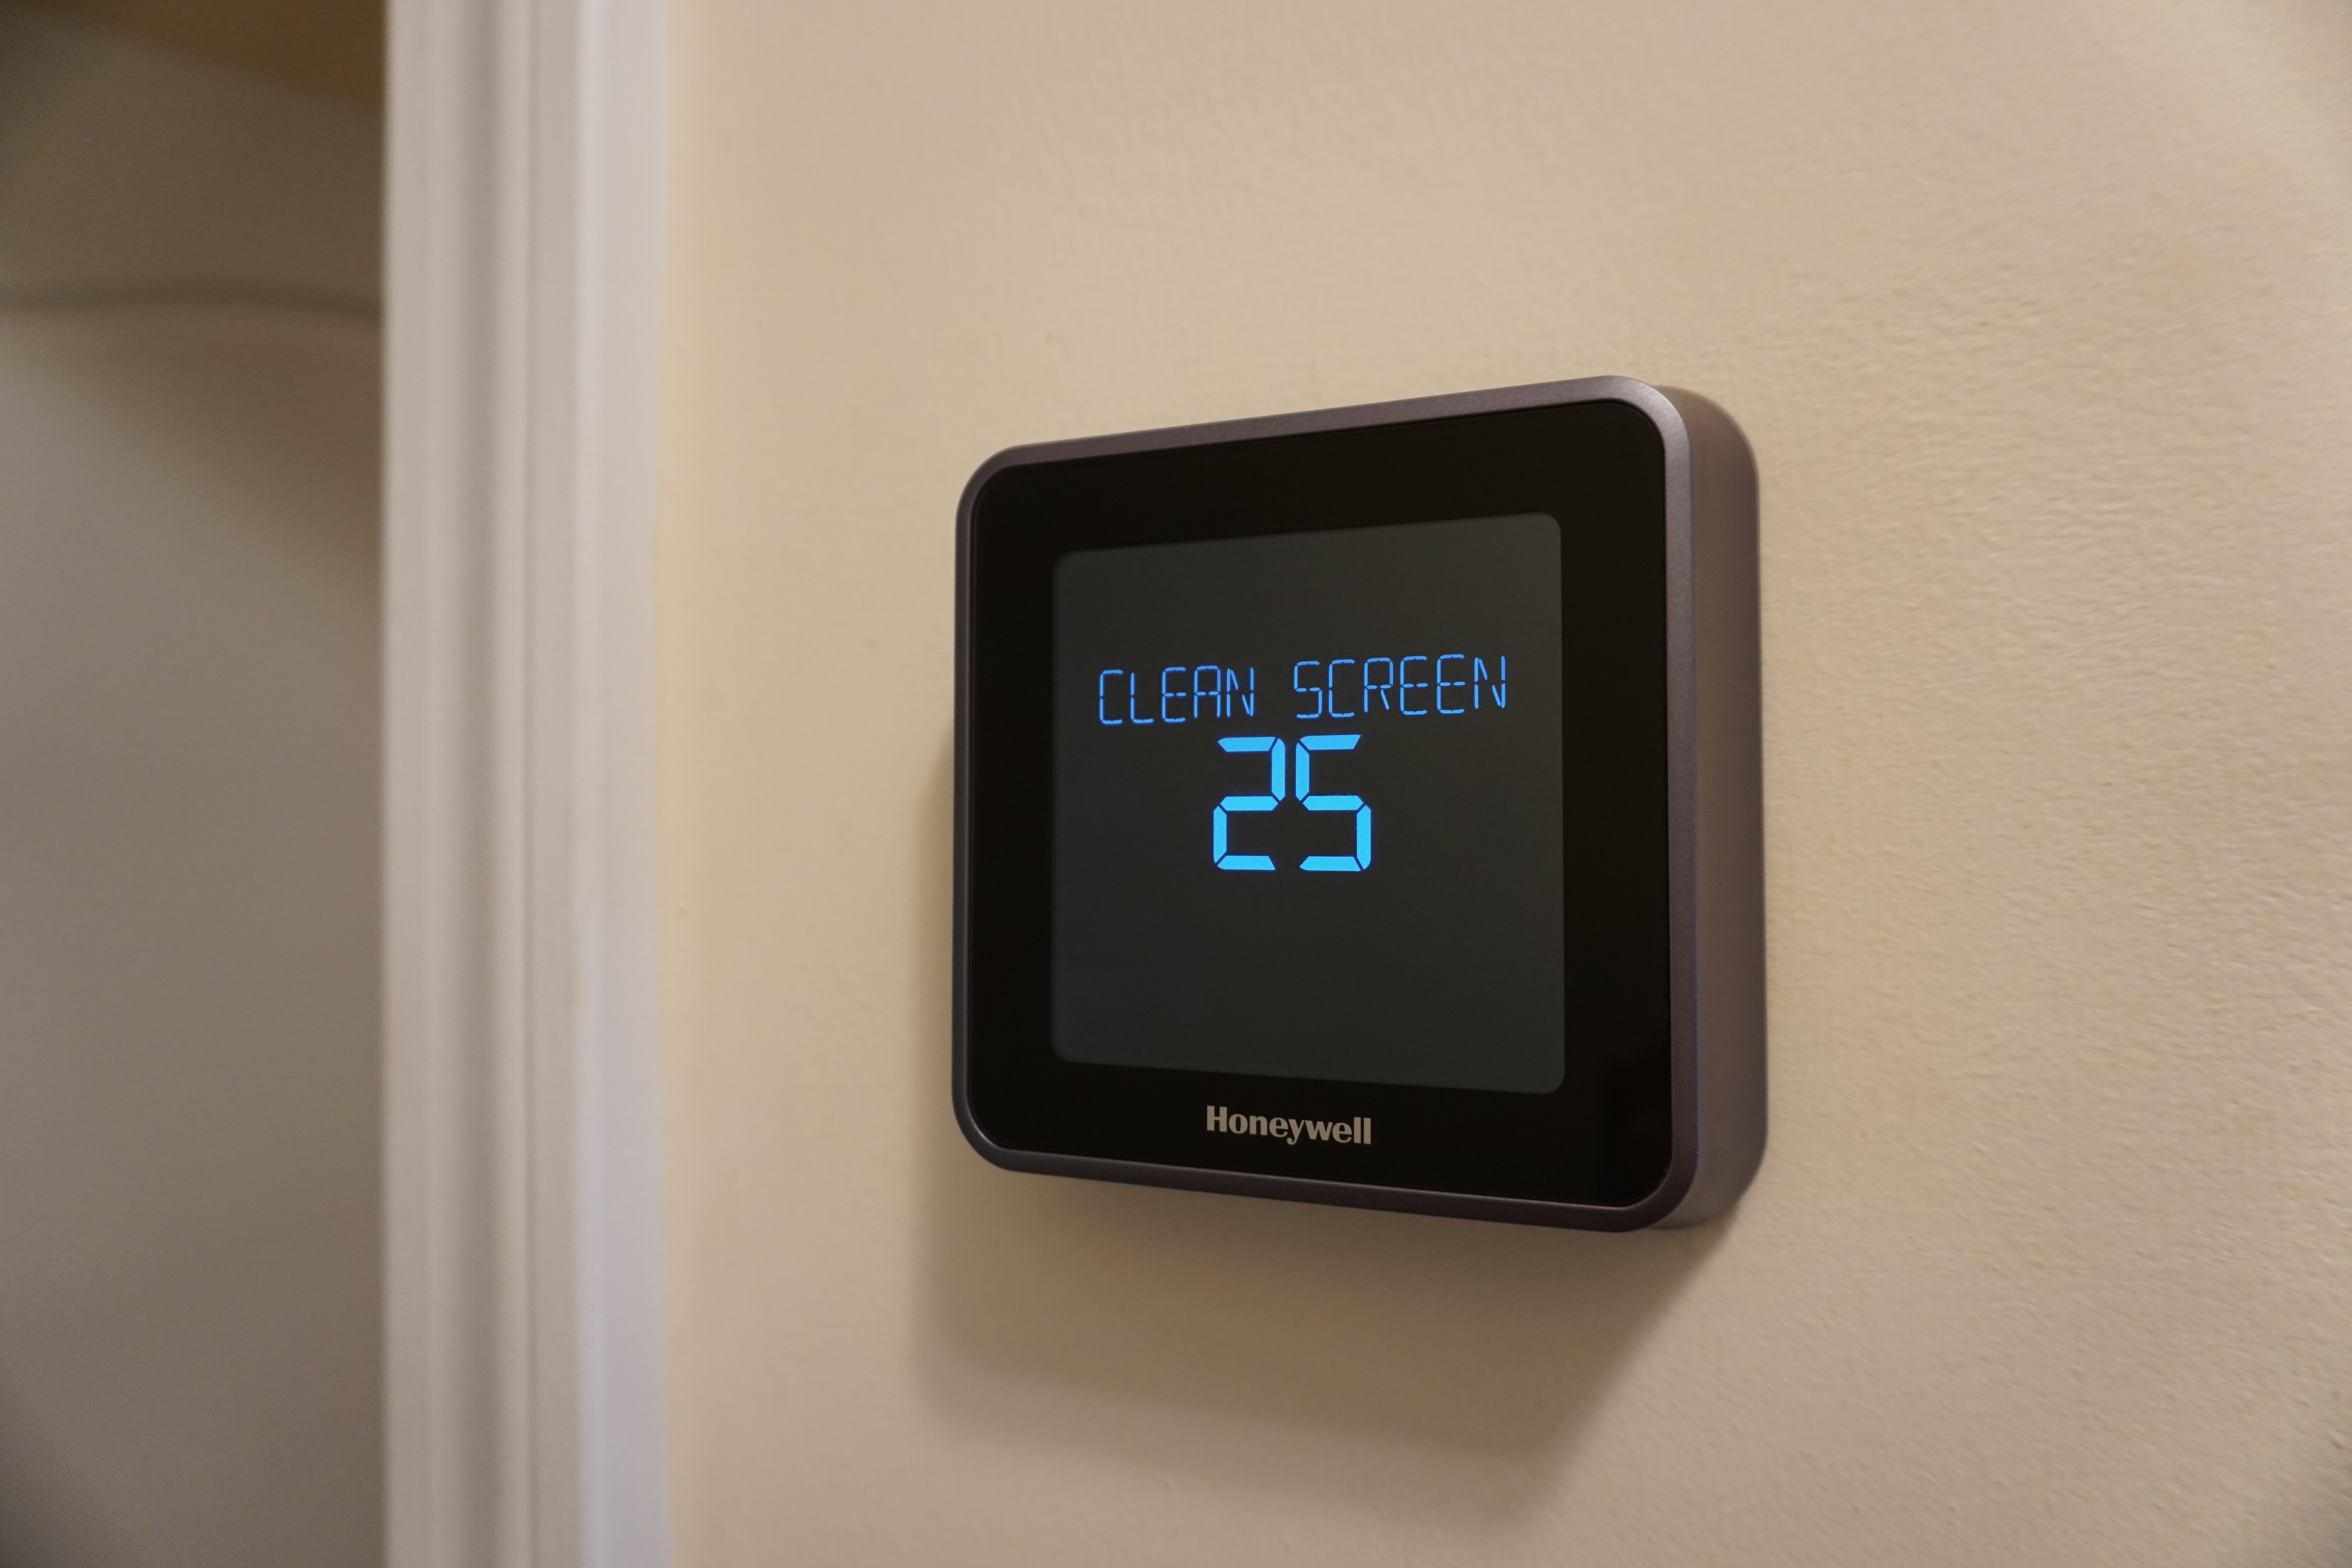 What Does Clean Screen Mean on Honeywell Thermostat? 